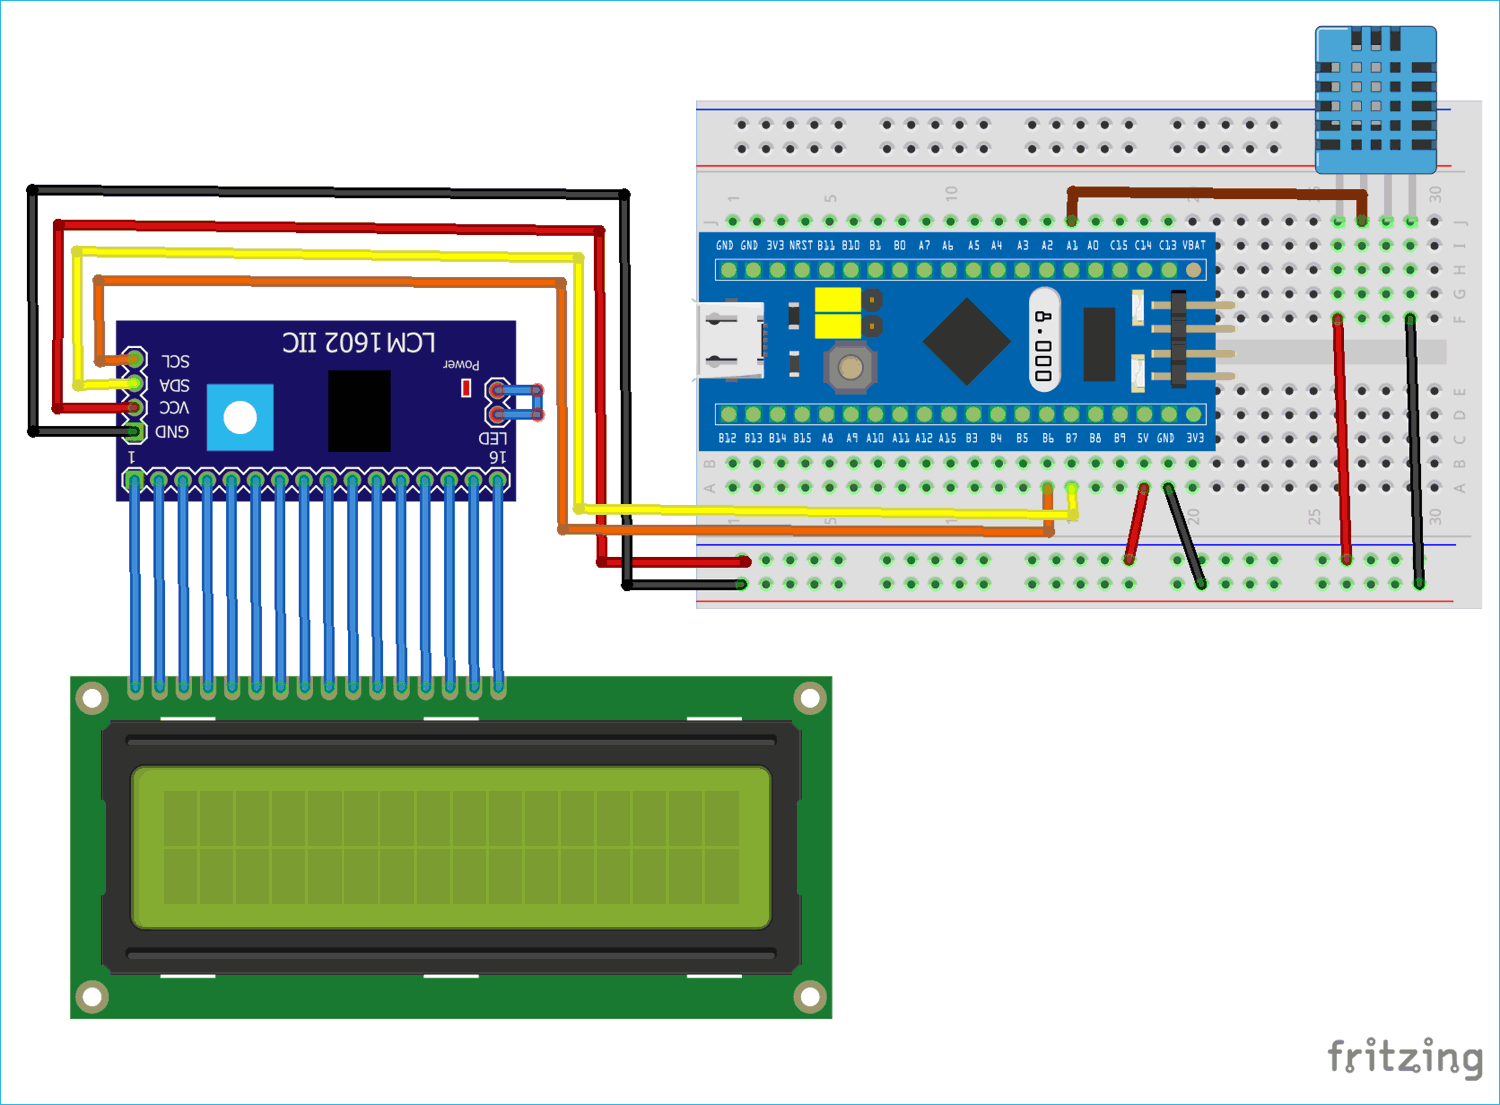 Circuit Diagram for Interfacing DHT11 Temperature & Humidity Sensor with STM32F103C8